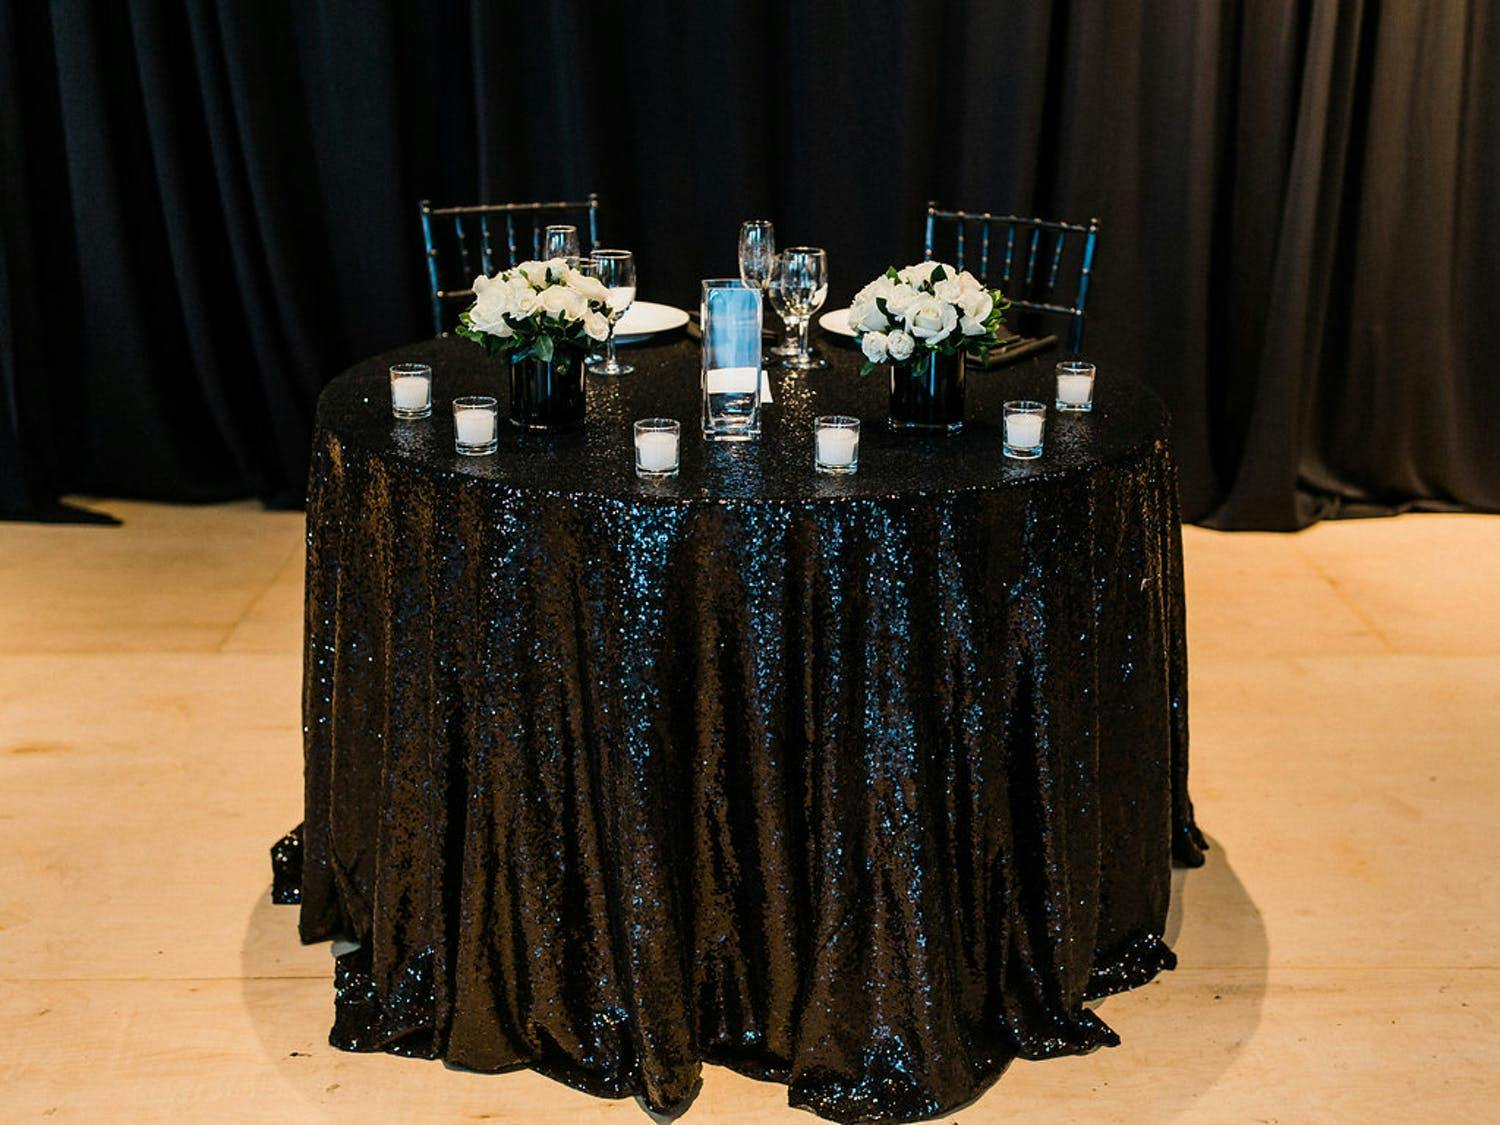 Wedding Sweetheart Table With Glittery Black Linen and White Flowers | PartySlate